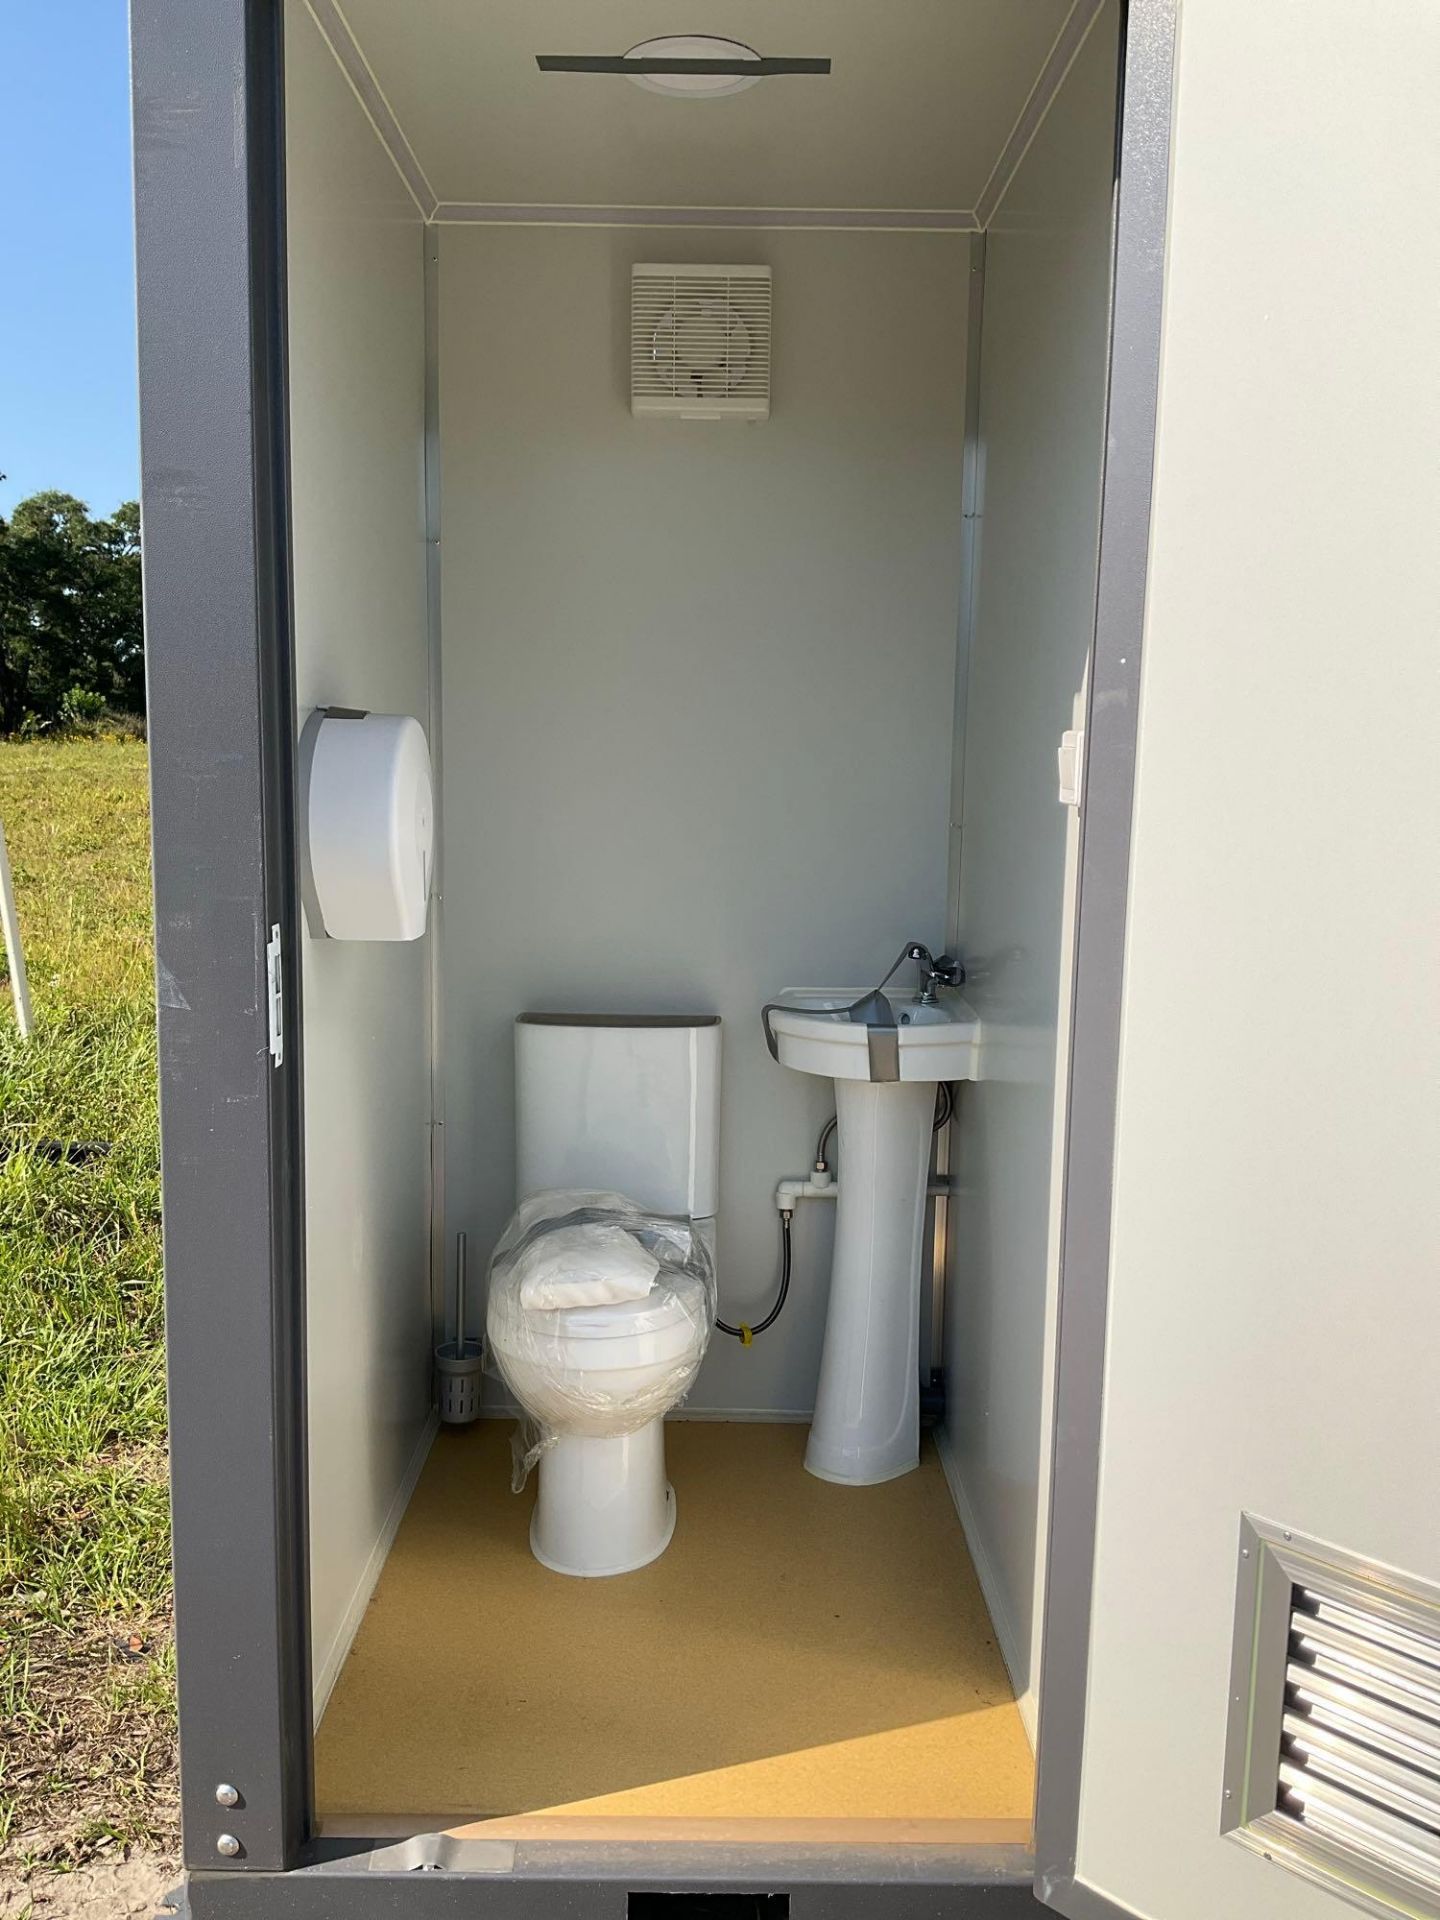 UNUSED PORTABLE DOUBLE BATHROOM UNIT, 2 STALLS, ELECTRIC & PLUMBING HOOK UP WITH EXTERIOR PLUMBING - Image 10 of 12